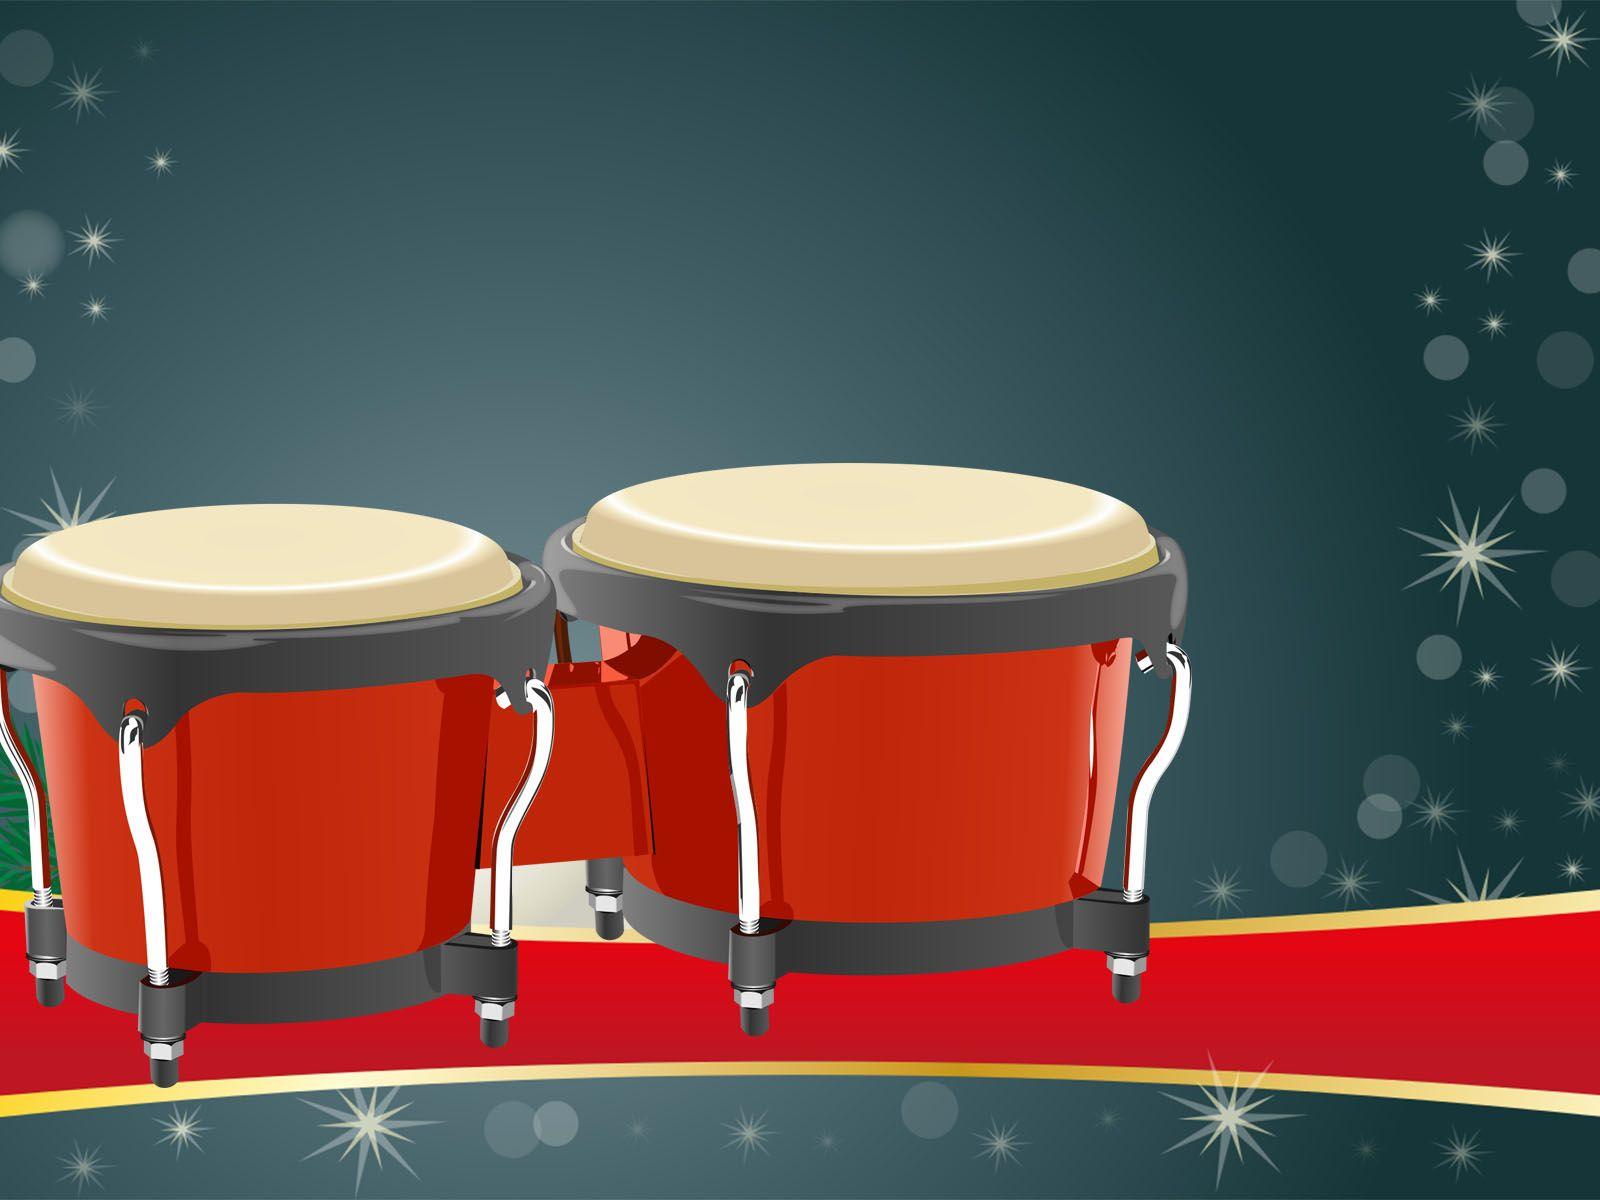 Bongos Instrument Powerpoint Background is a free border background